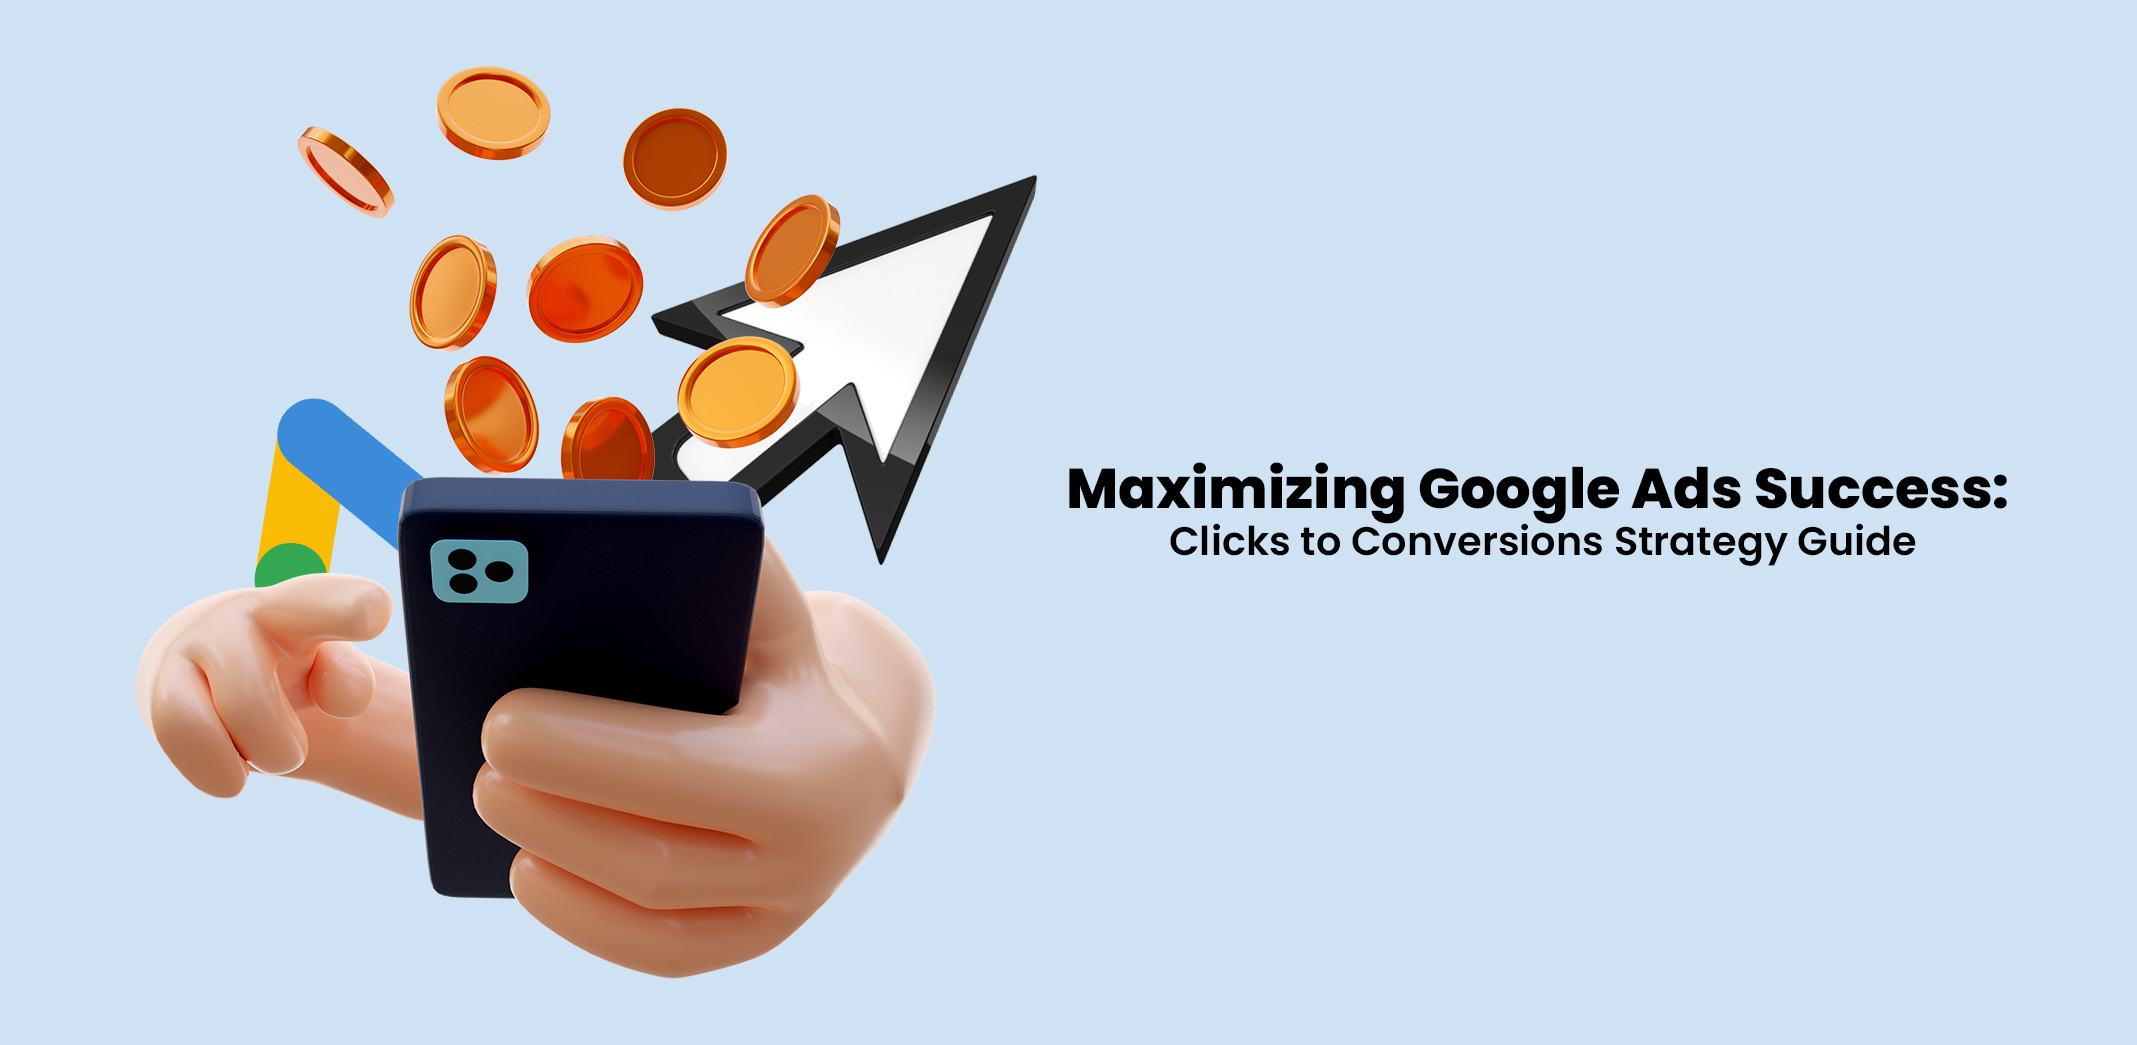 Maximizing Google Ads Success: Clicks to Conversions Strategy Guide